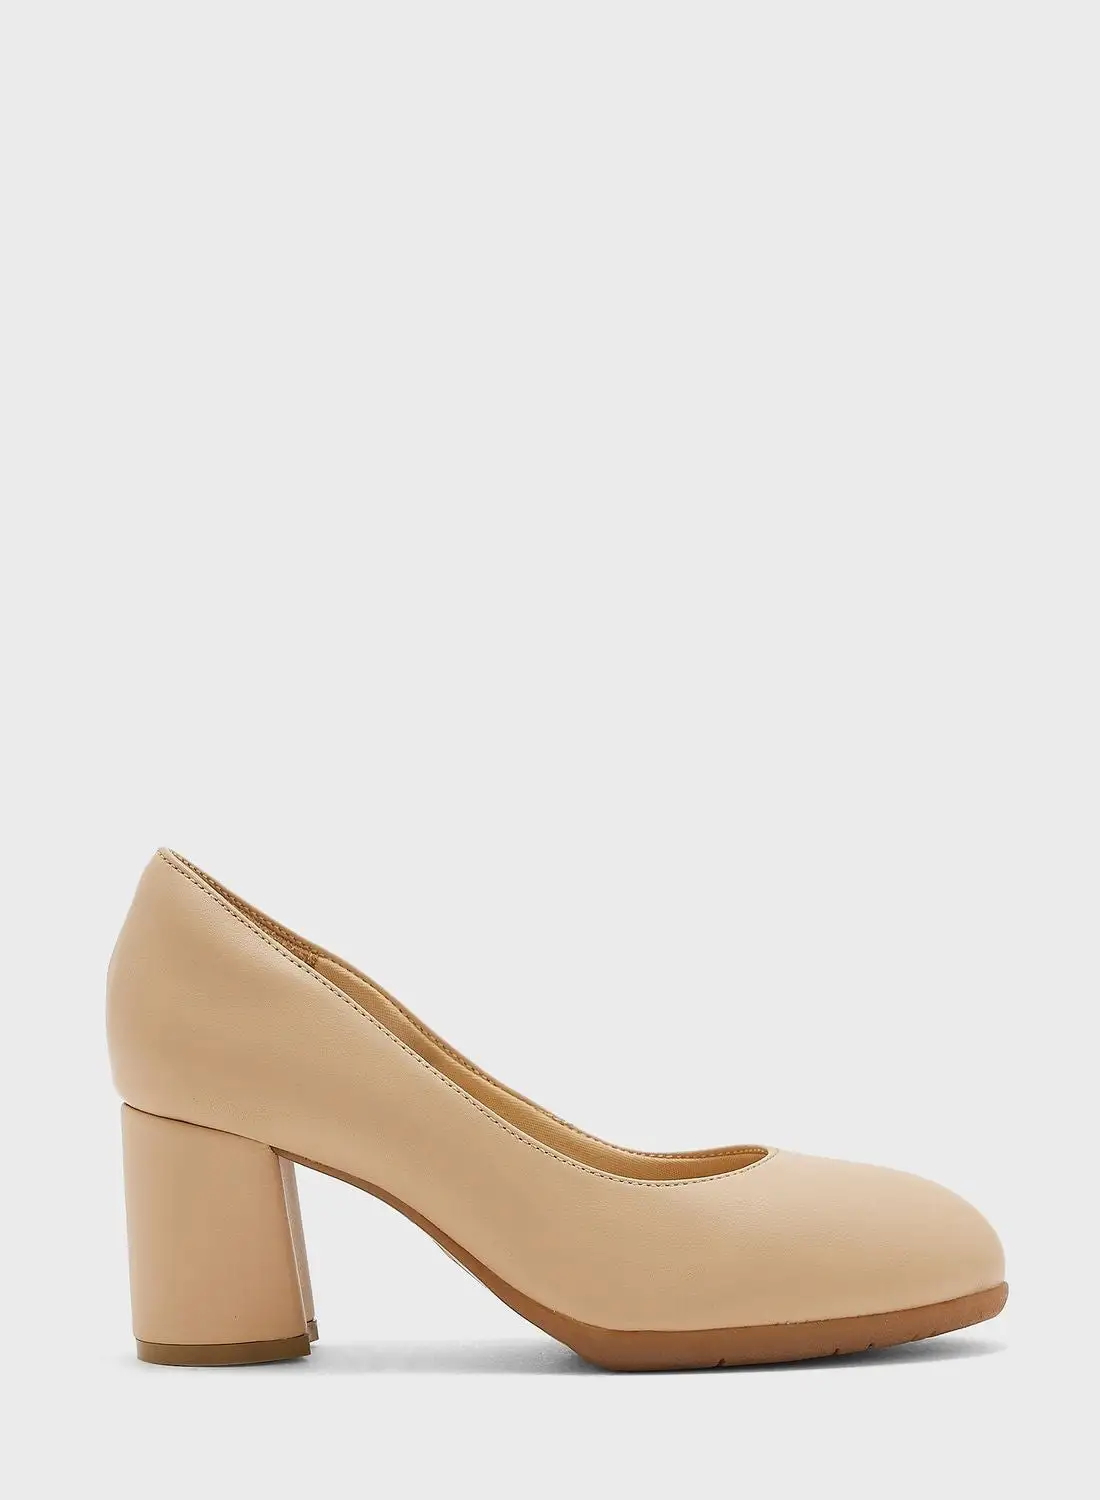 Le Confort Pointed Toe High-Heel Pumps